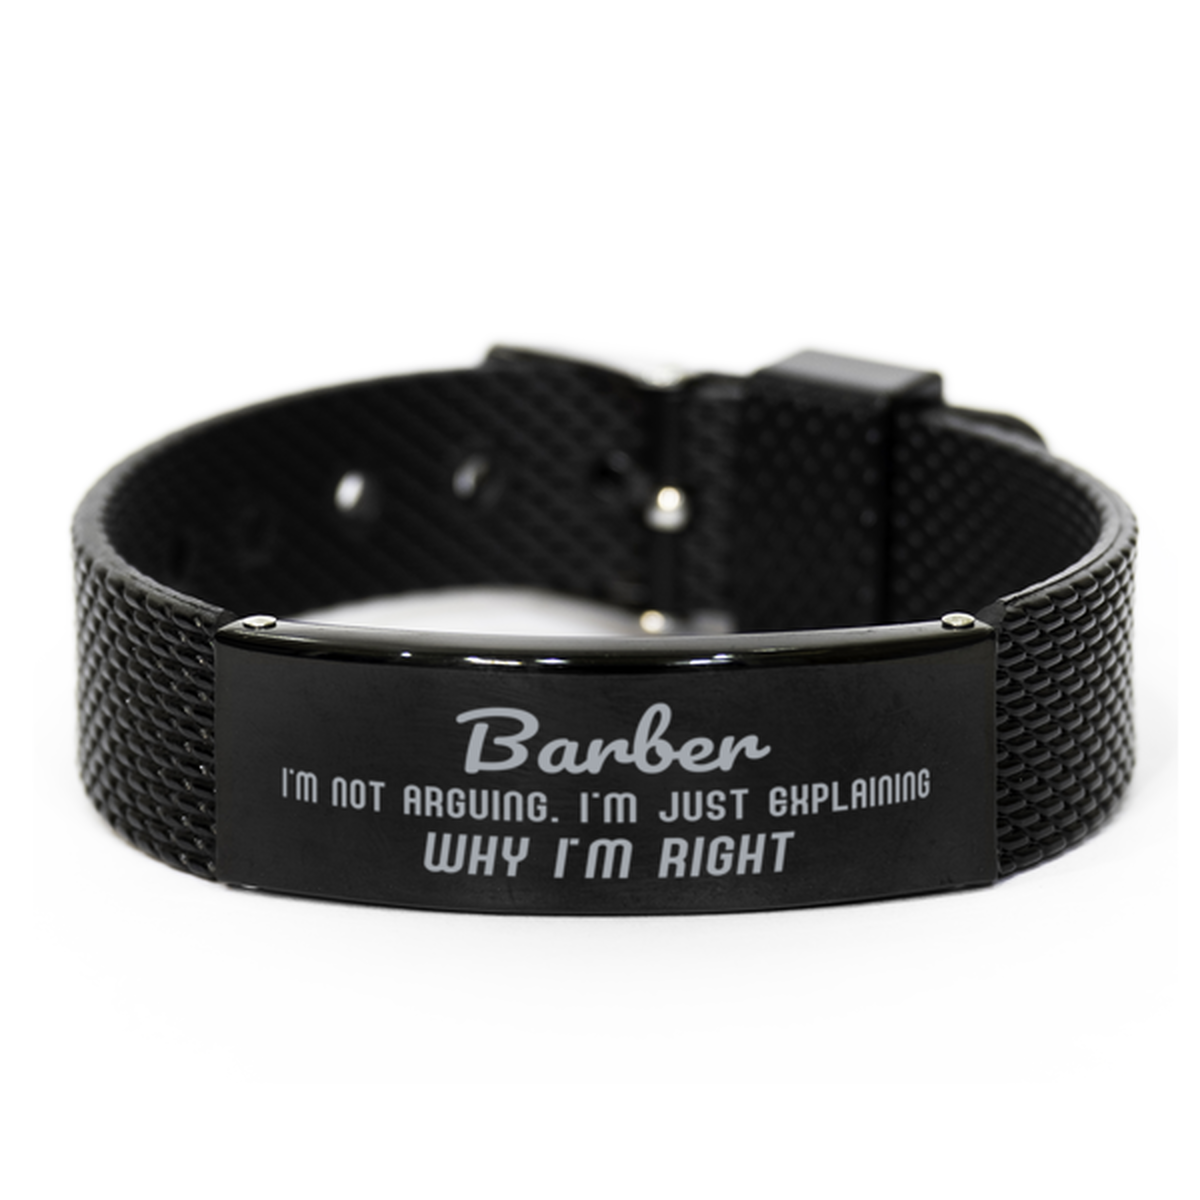 Barber I'm not Arguing. I'm Just Explaining Why I'm RIGHT Black Shark Mesh Bracelet, Funny Saying Quote Barber Gifts For Barber Graduation Birthday Christmas Gifts for Men Women Coworker